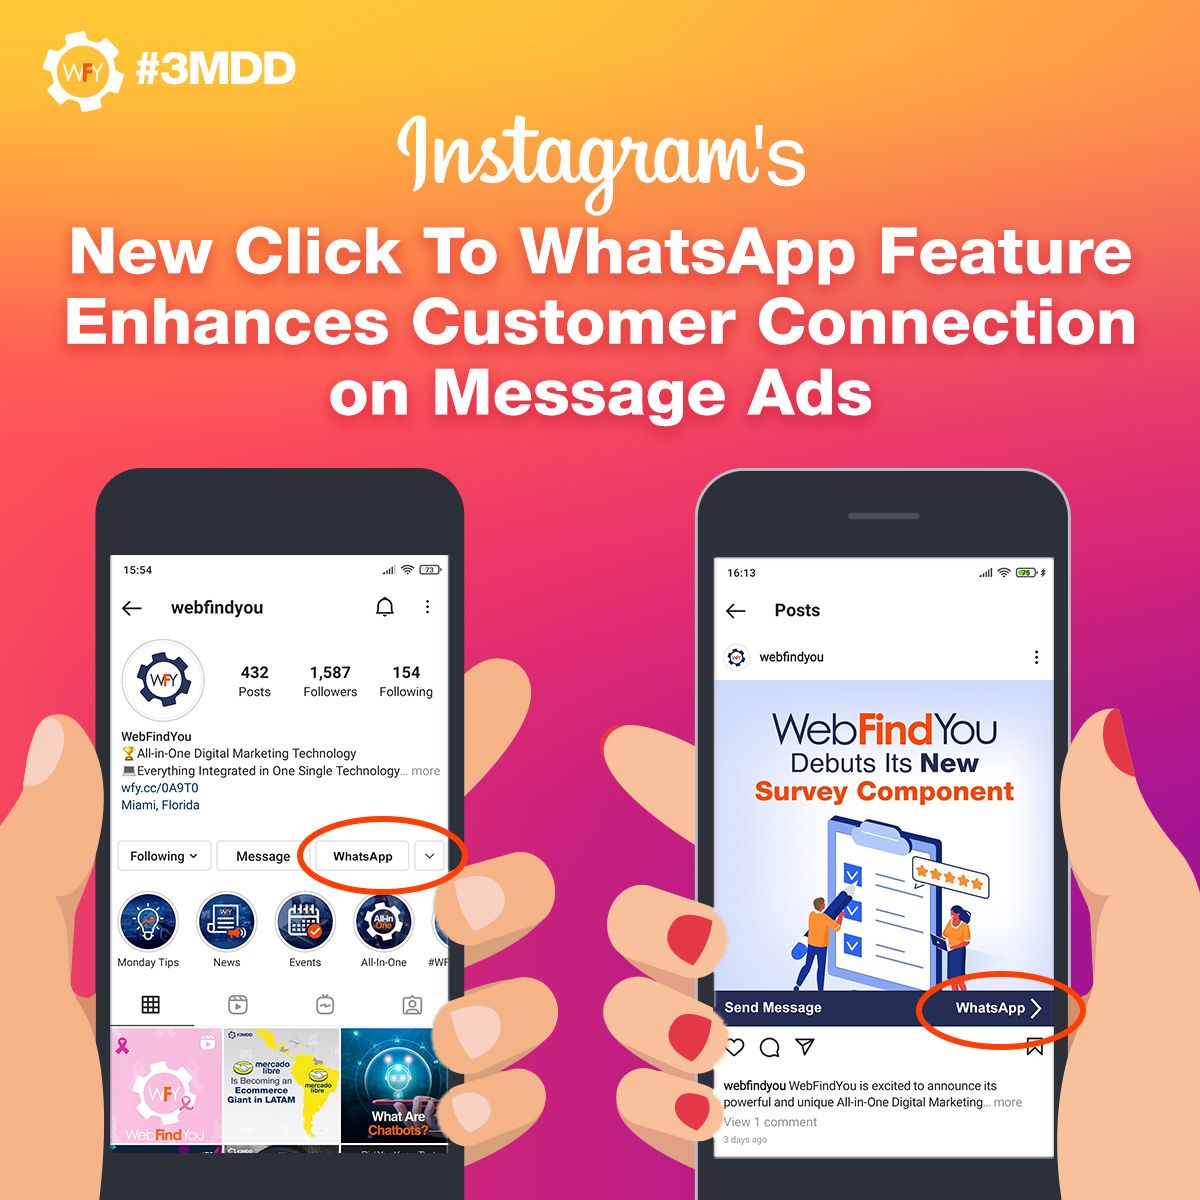 Instagram's New Click To WhatsApp Feature Enhances Customer Connection on Message Ads